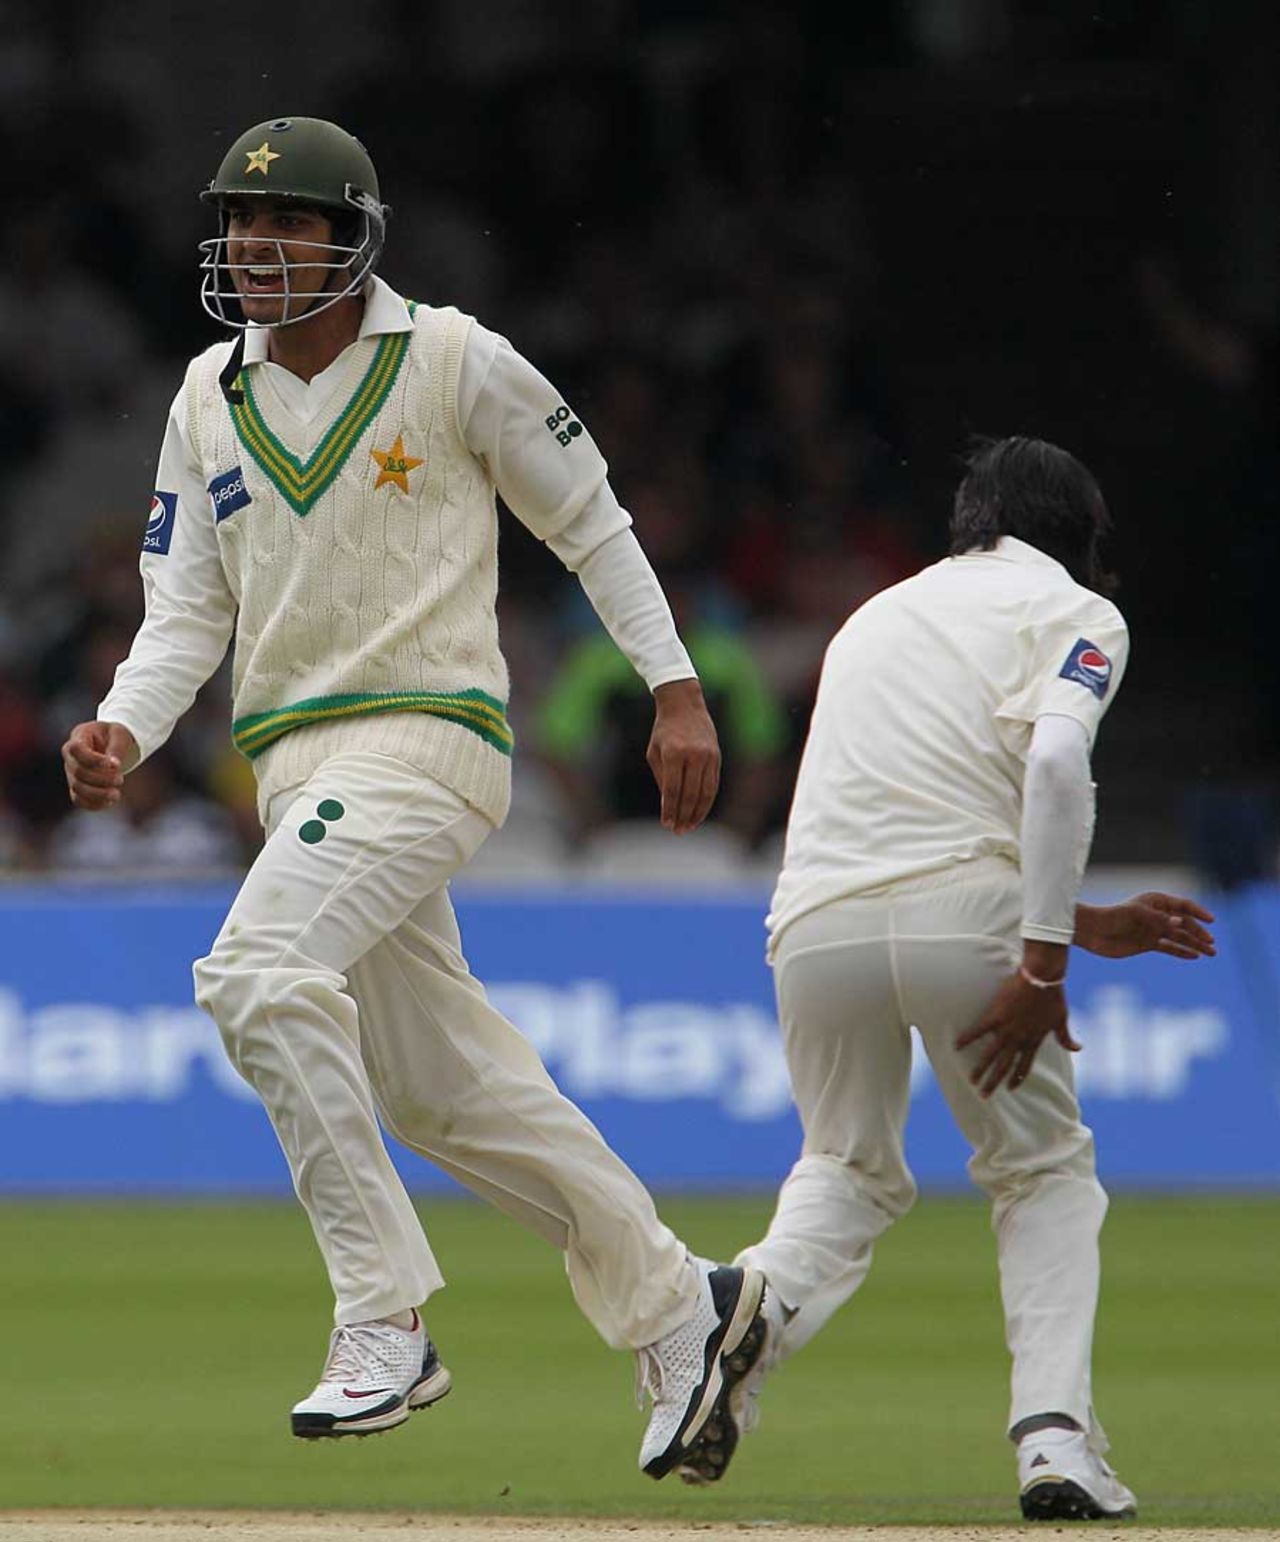 Umar Amin took a brilliant catch at short leg to remove Ricky Ponting, Pakistan v Australia, 1st Test, Lord's, July 13, 2010